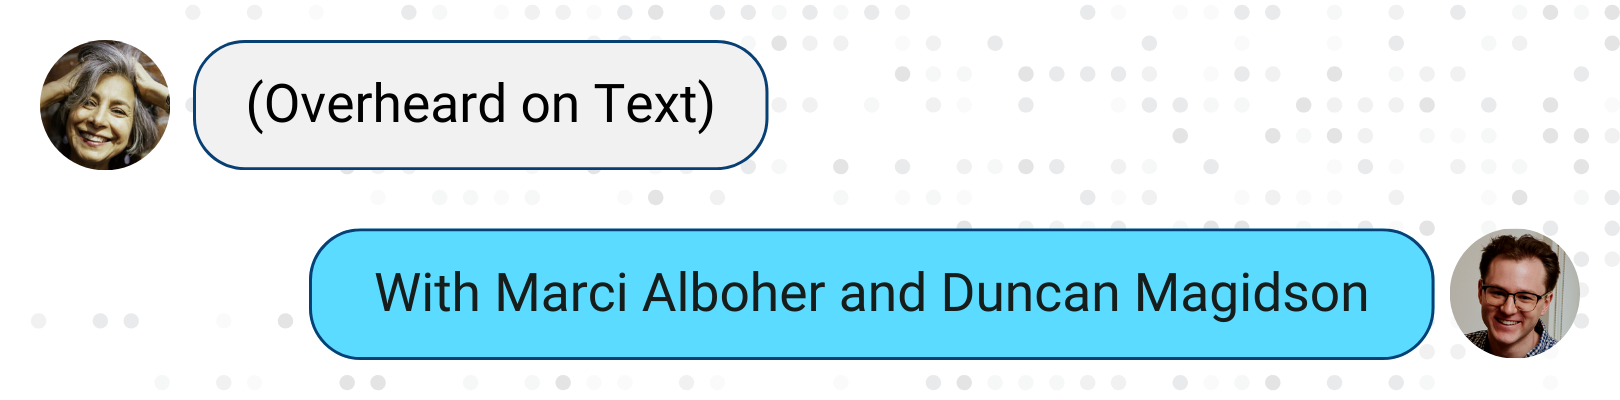 graphic stylized to look like text messages reading (overheard on text" with Marci Alboher and Duncan Magidson